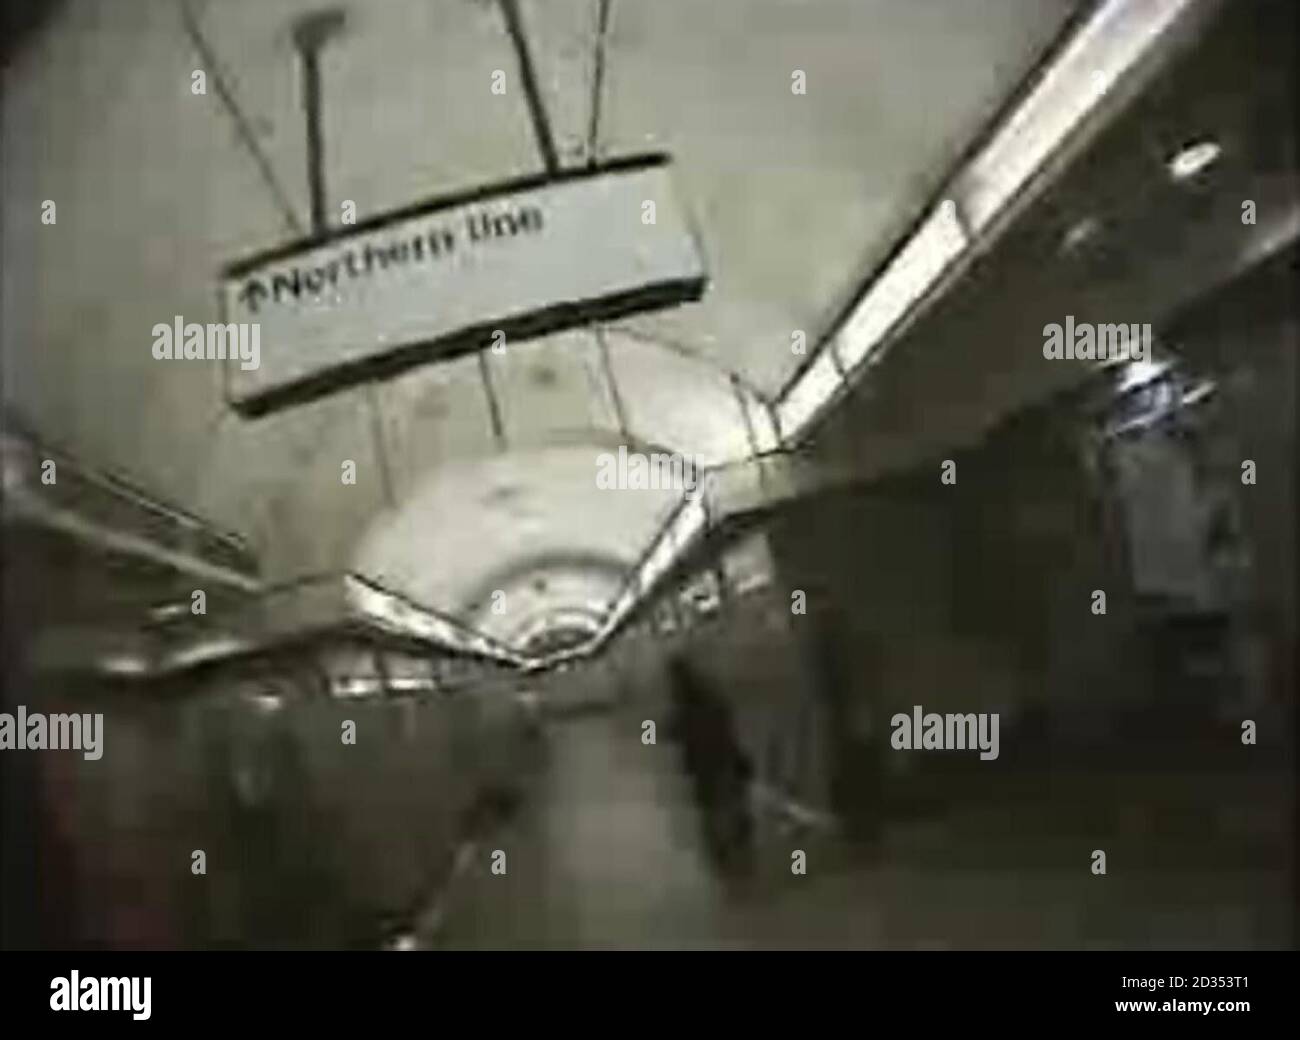 Image taken from the YouTube website of Norwegian Peter Olenick who skied down an escalator at Angel Tube station in London. Stock Photo